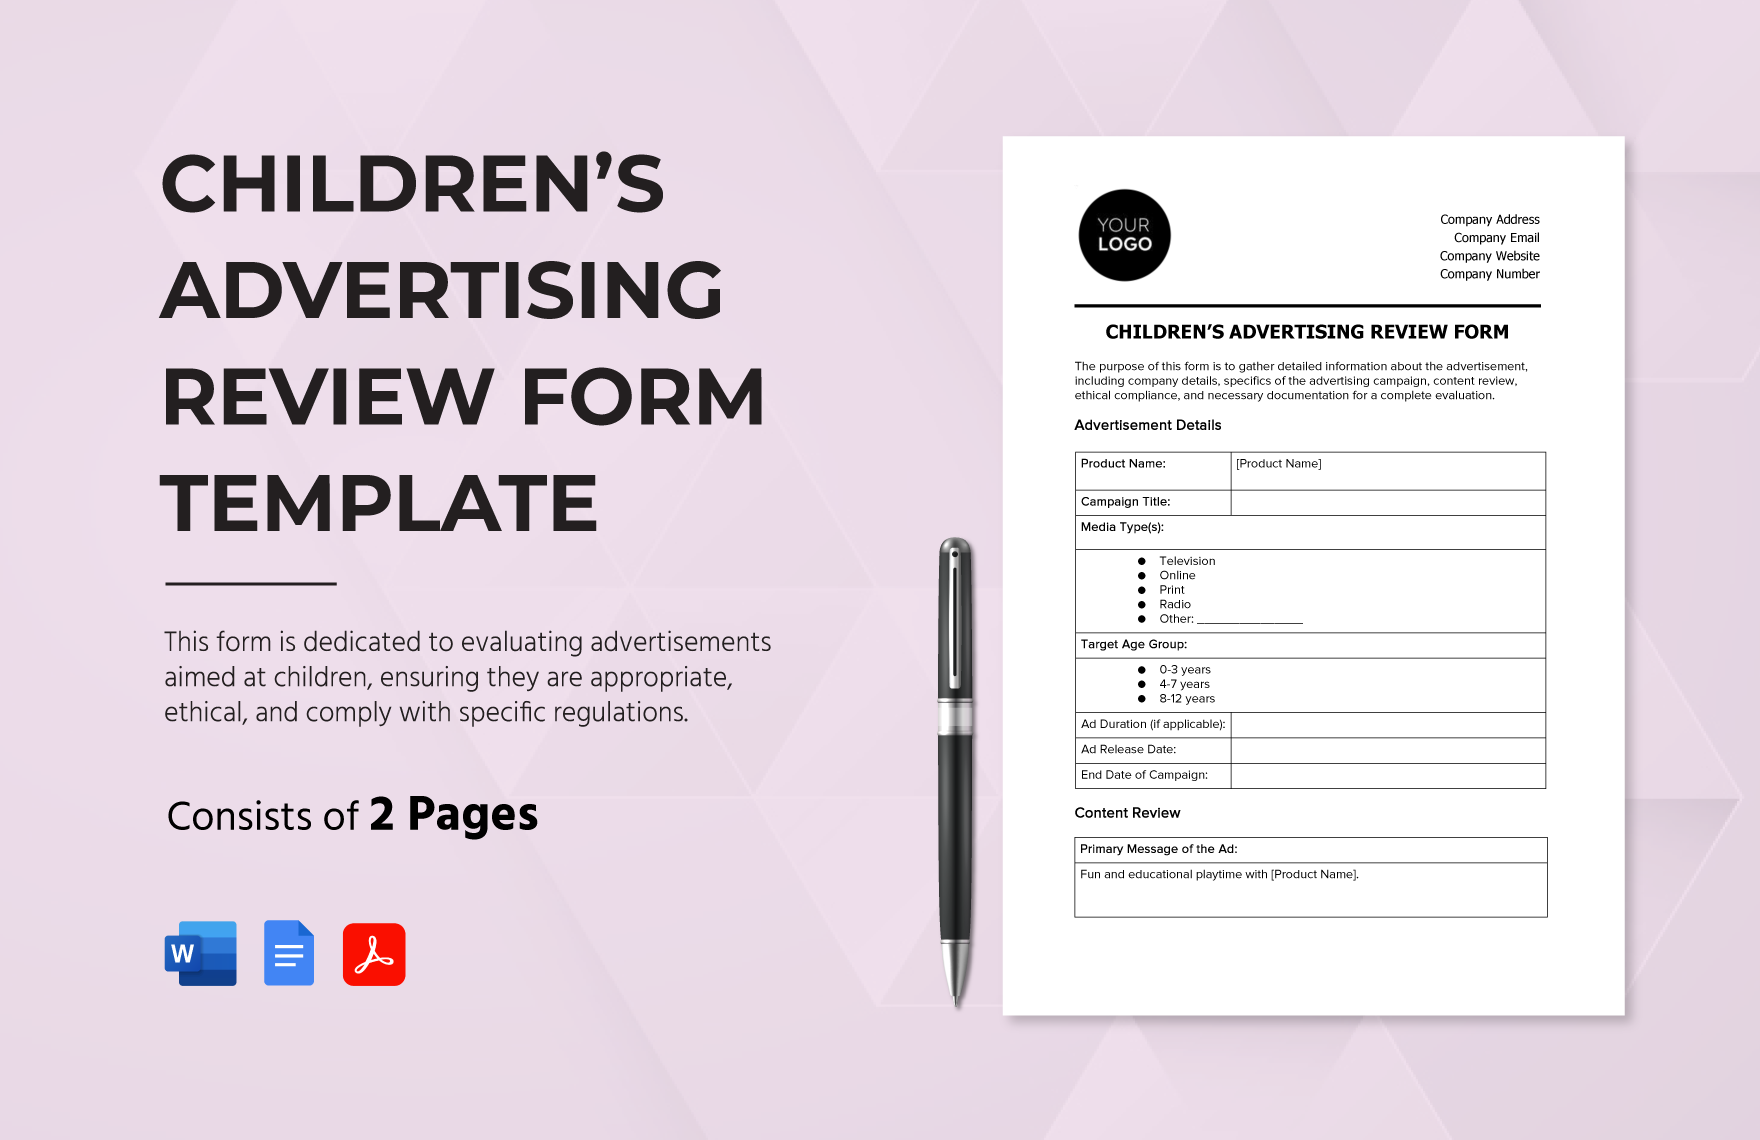 Children’s Advertising Review Form Template in Word, Google Docs, PDF